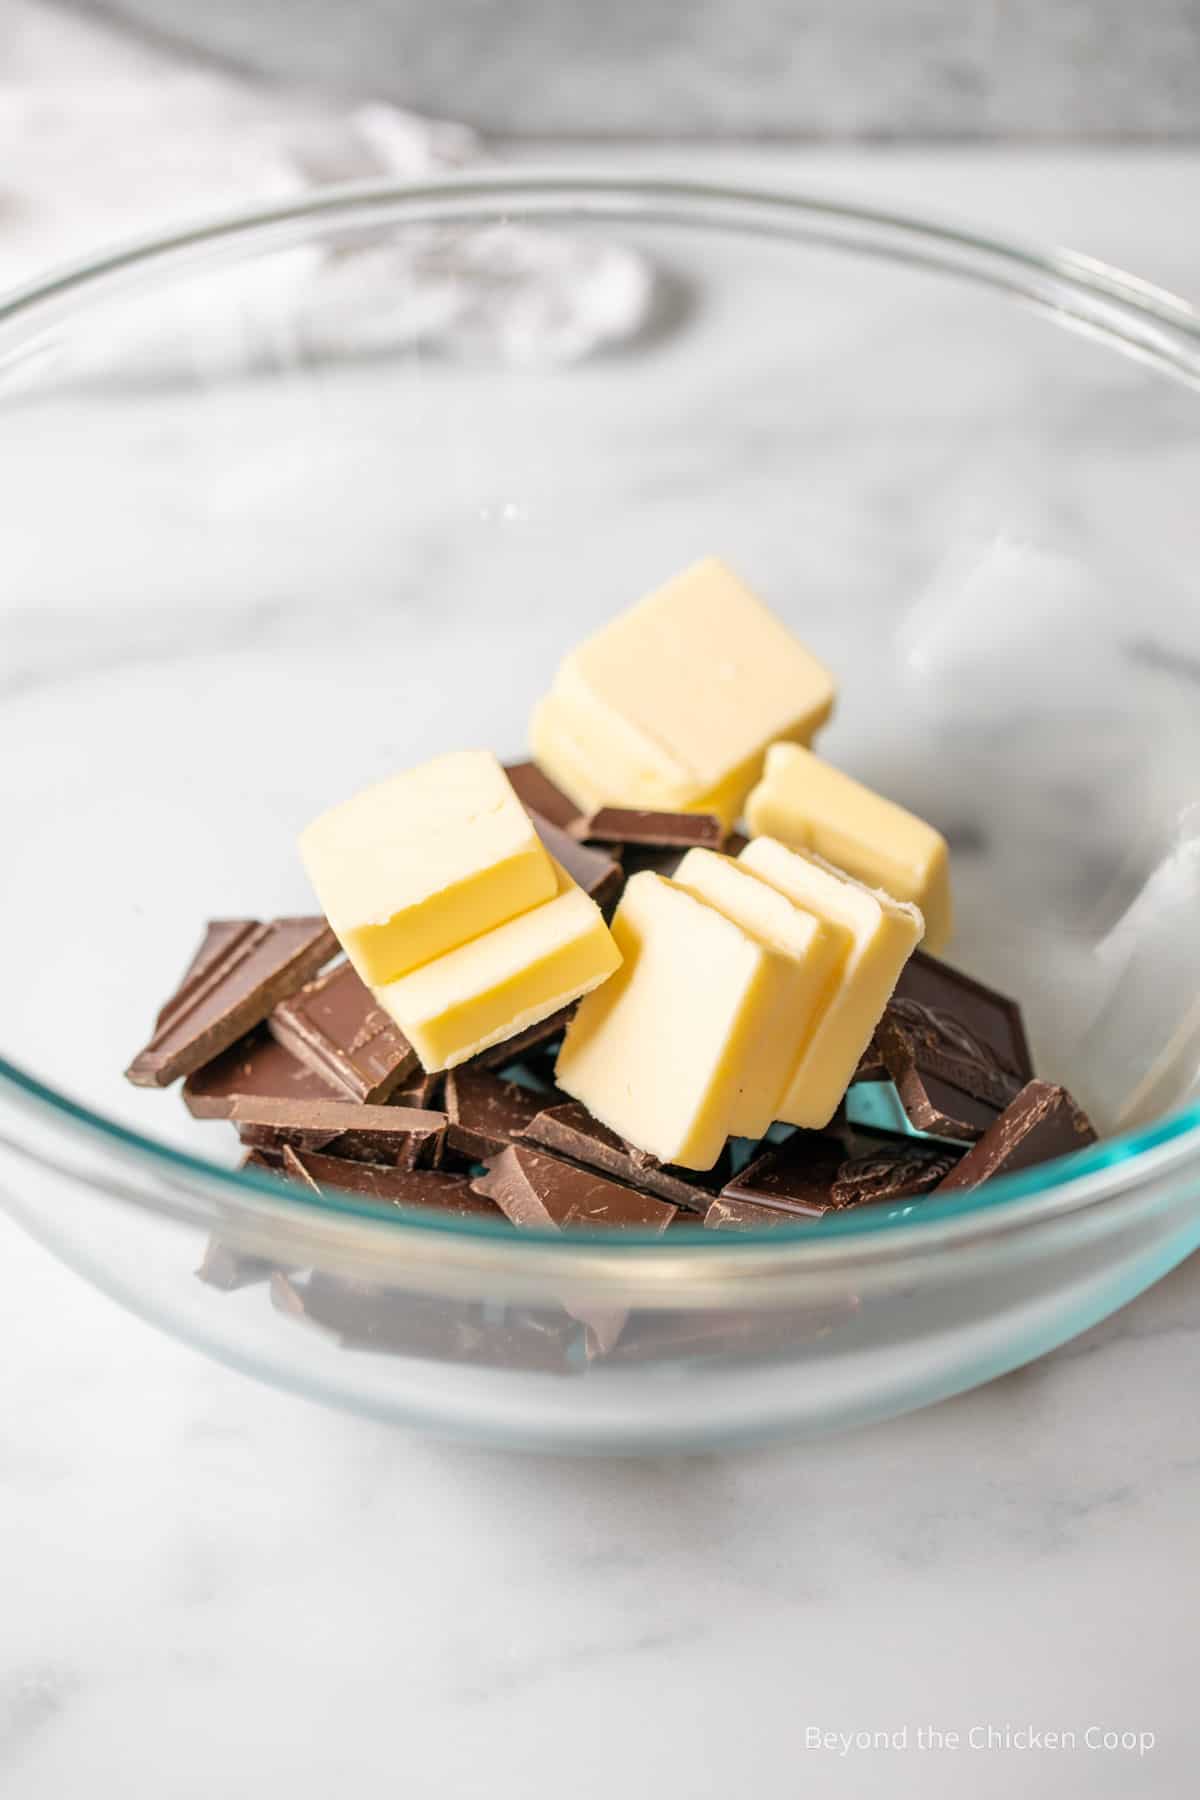 Butter and chocolate in a mixing bowl.